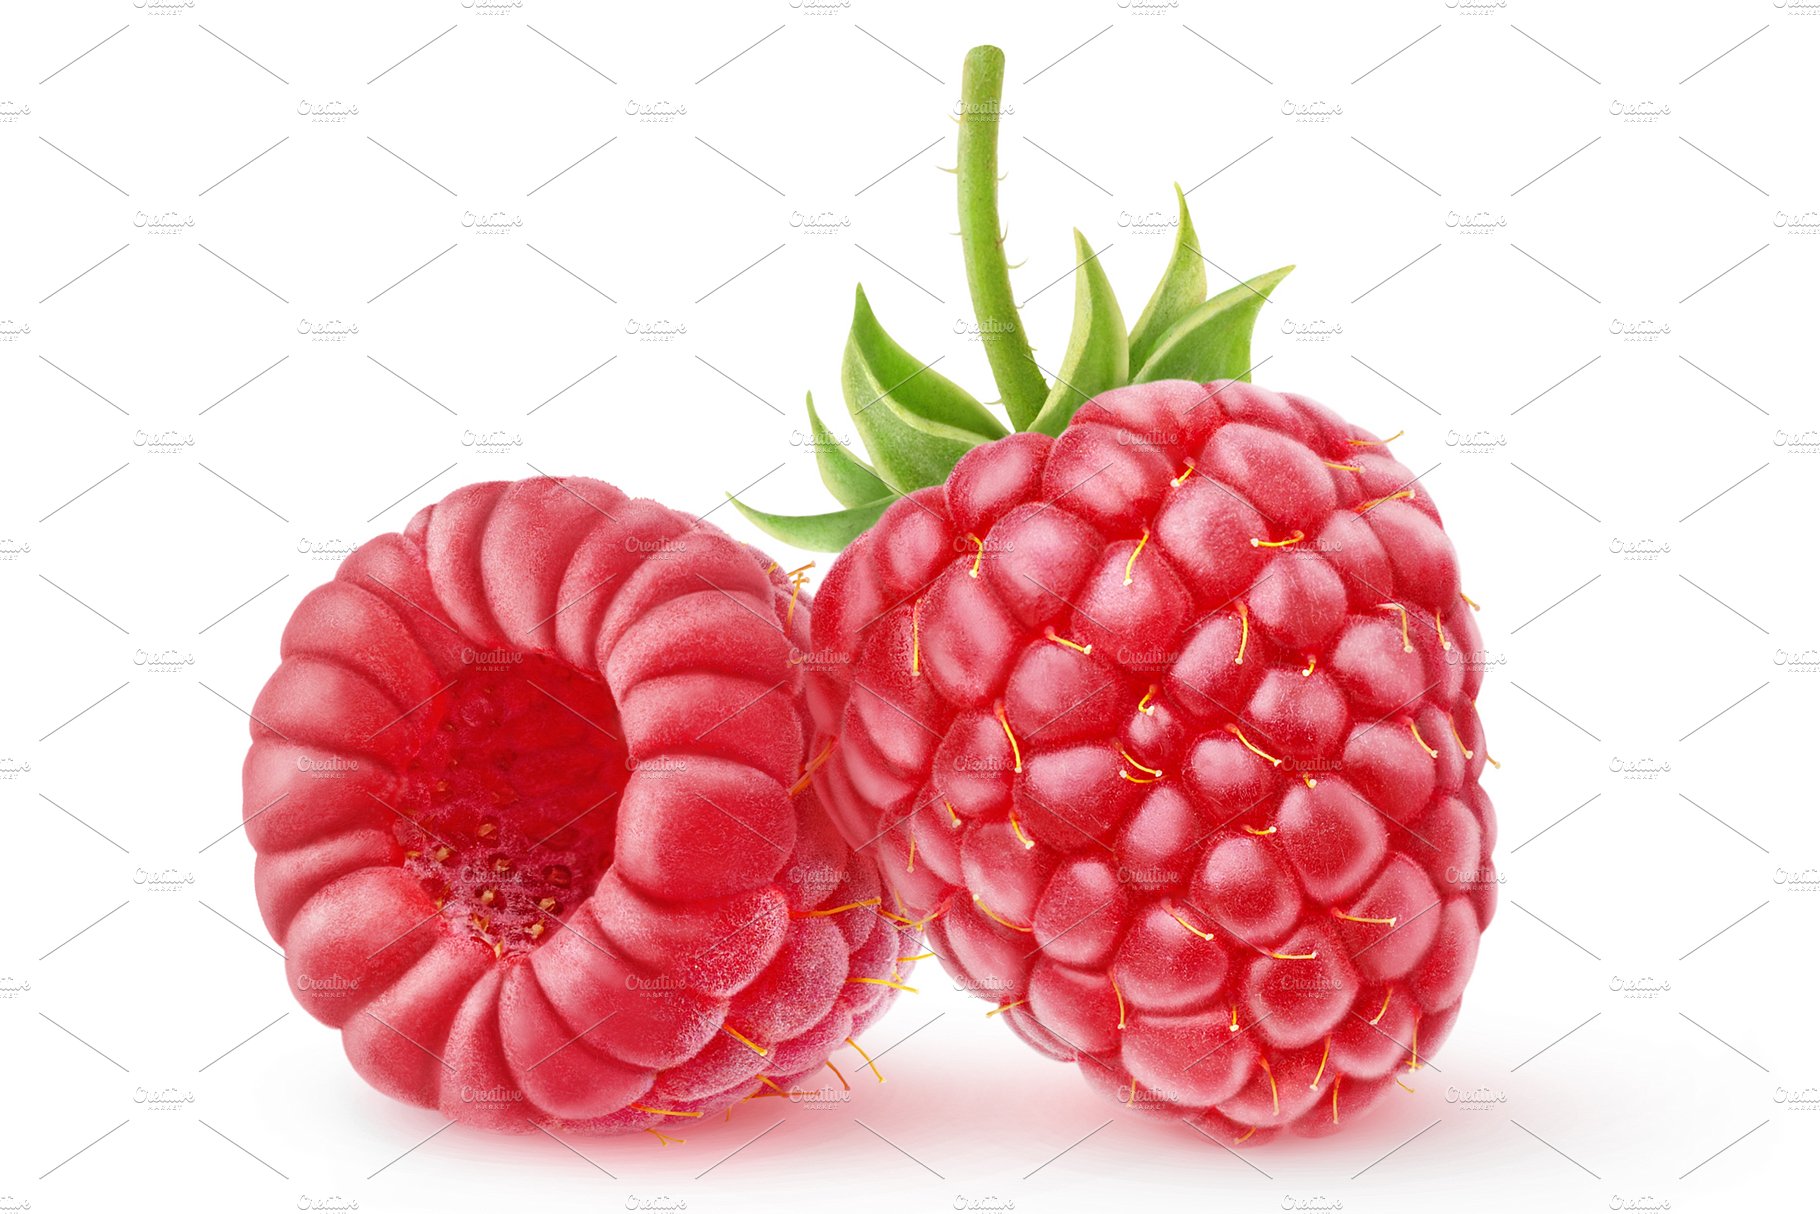 Two raspberries cover image.